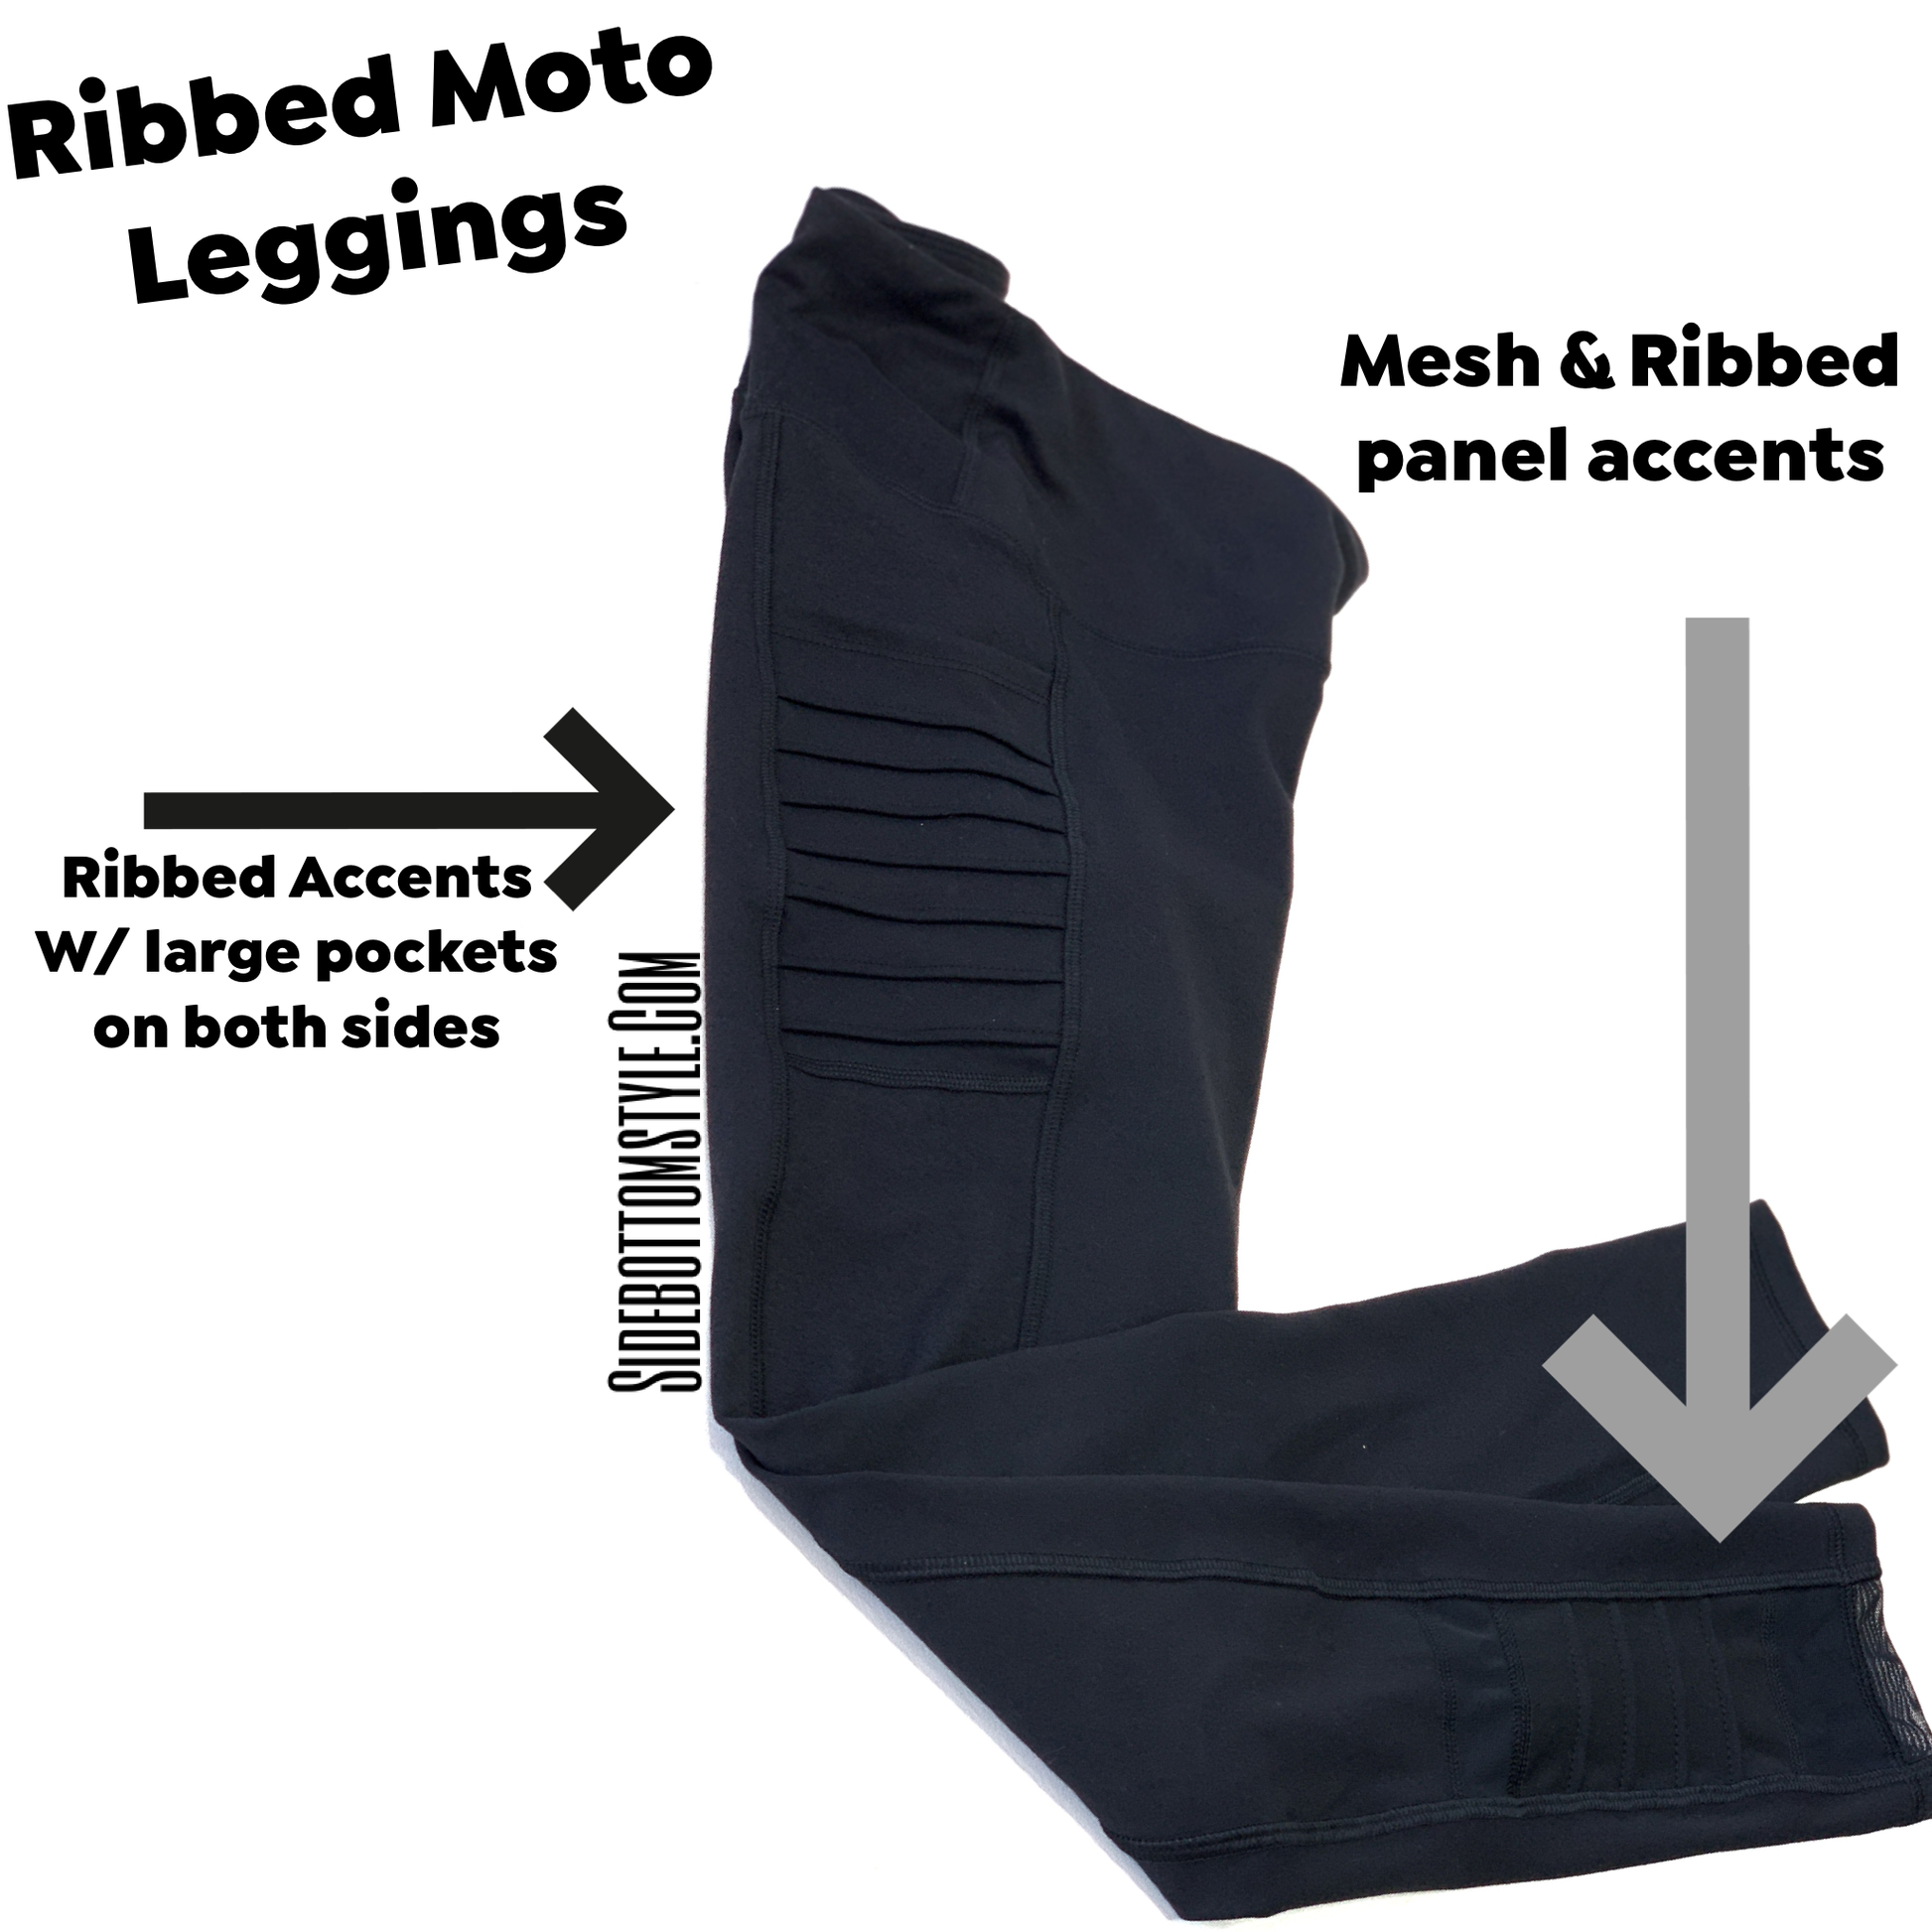 Black moto leggings features deep pockets on both sides plus mesh and ribbed panels.